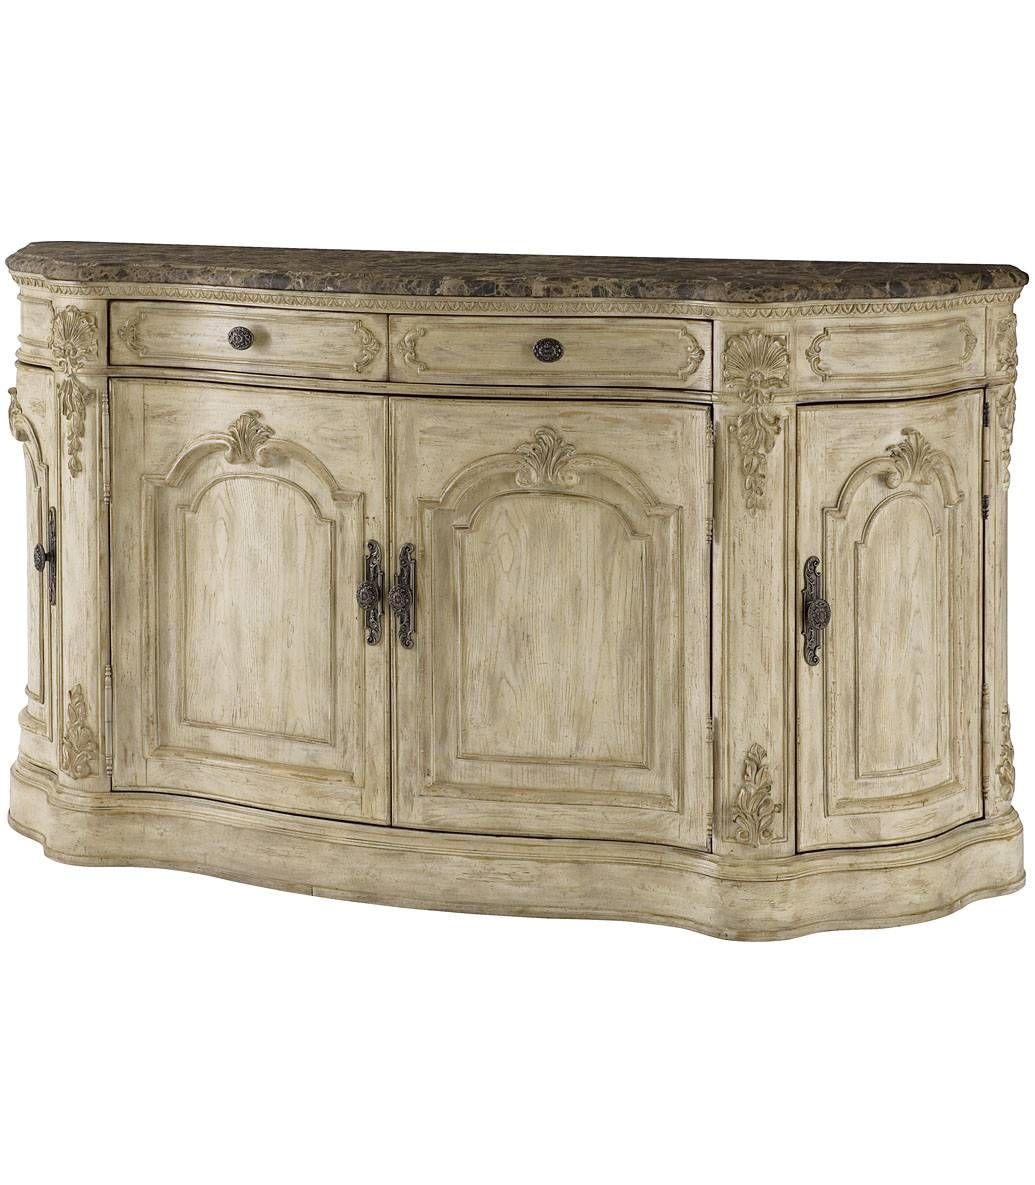 Antique French Country Dinette Decor With Adjustable Shelf Buffet Inside Marble Top Sideboards (View 14 of 15)